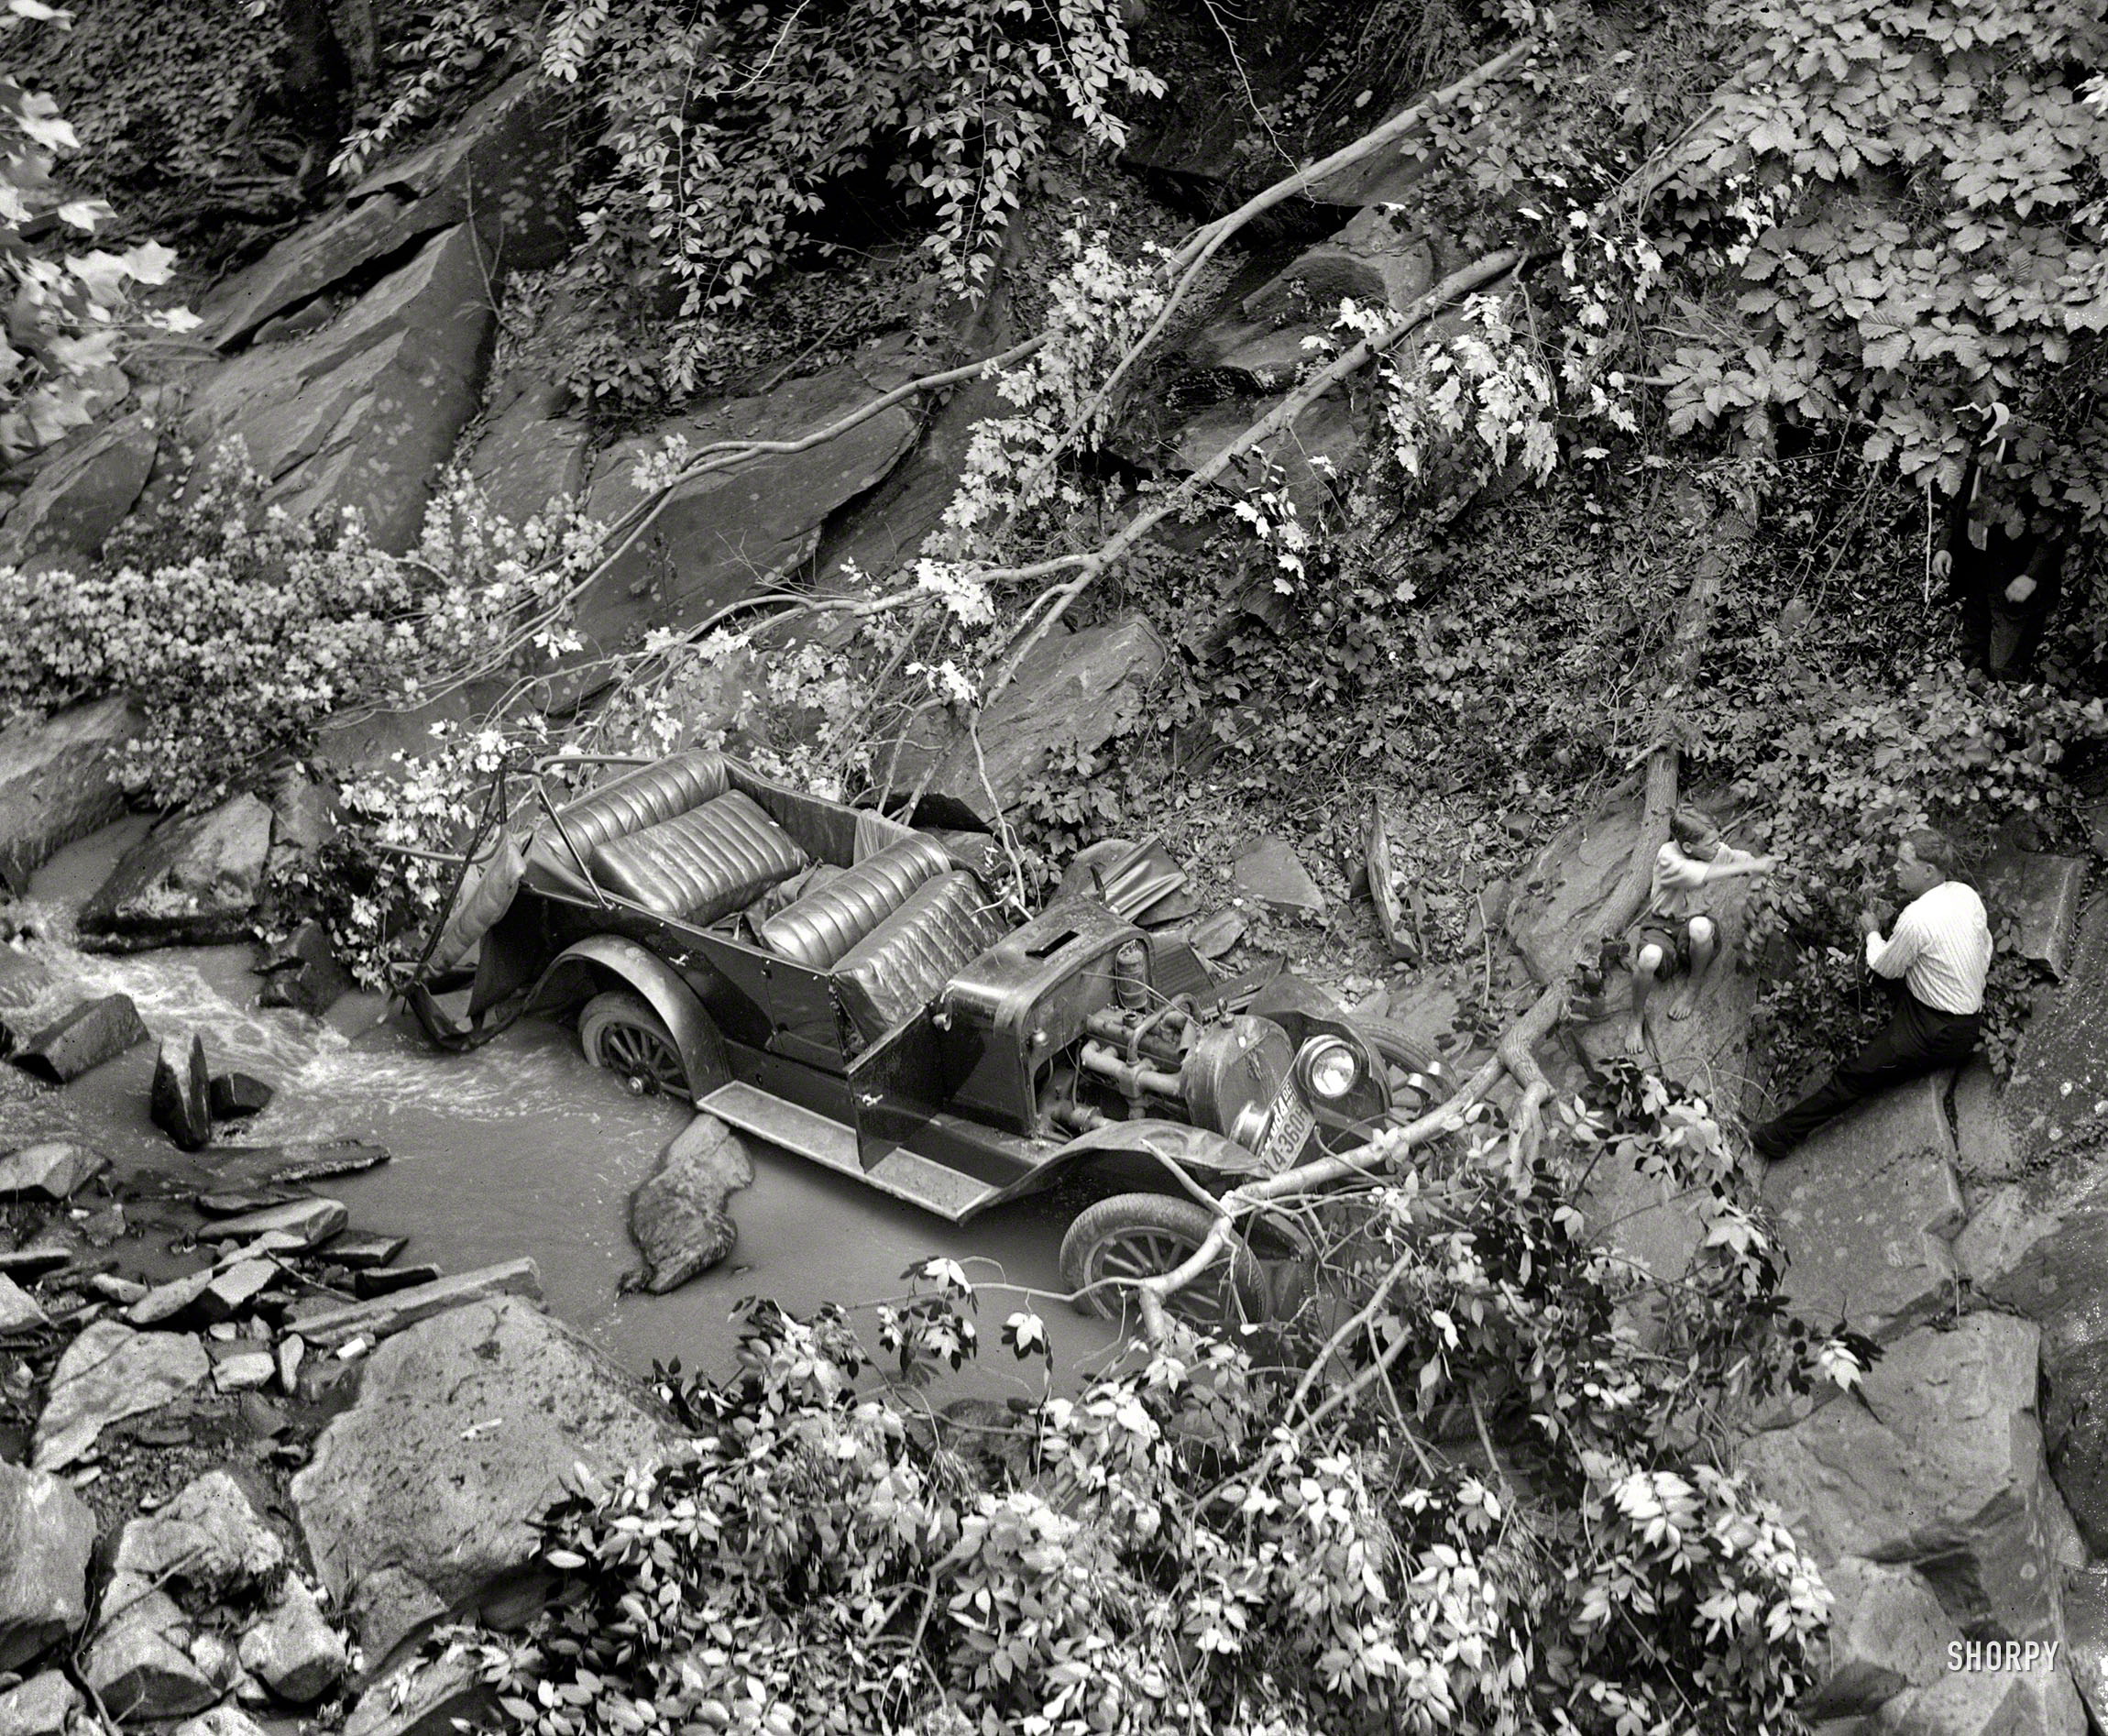 &nbsp; &nbsp; &nbsp; &nbsp; A larger, more detailed version of a photo we first posted six years ago, with the details supplied by Shorpy member Stanton Square, accompanied by a "new" image here.
Washington, D.C. A curious photograph titled "Auto wreck. 7/30/23." National Photo Company Collection glass negative. View full size.